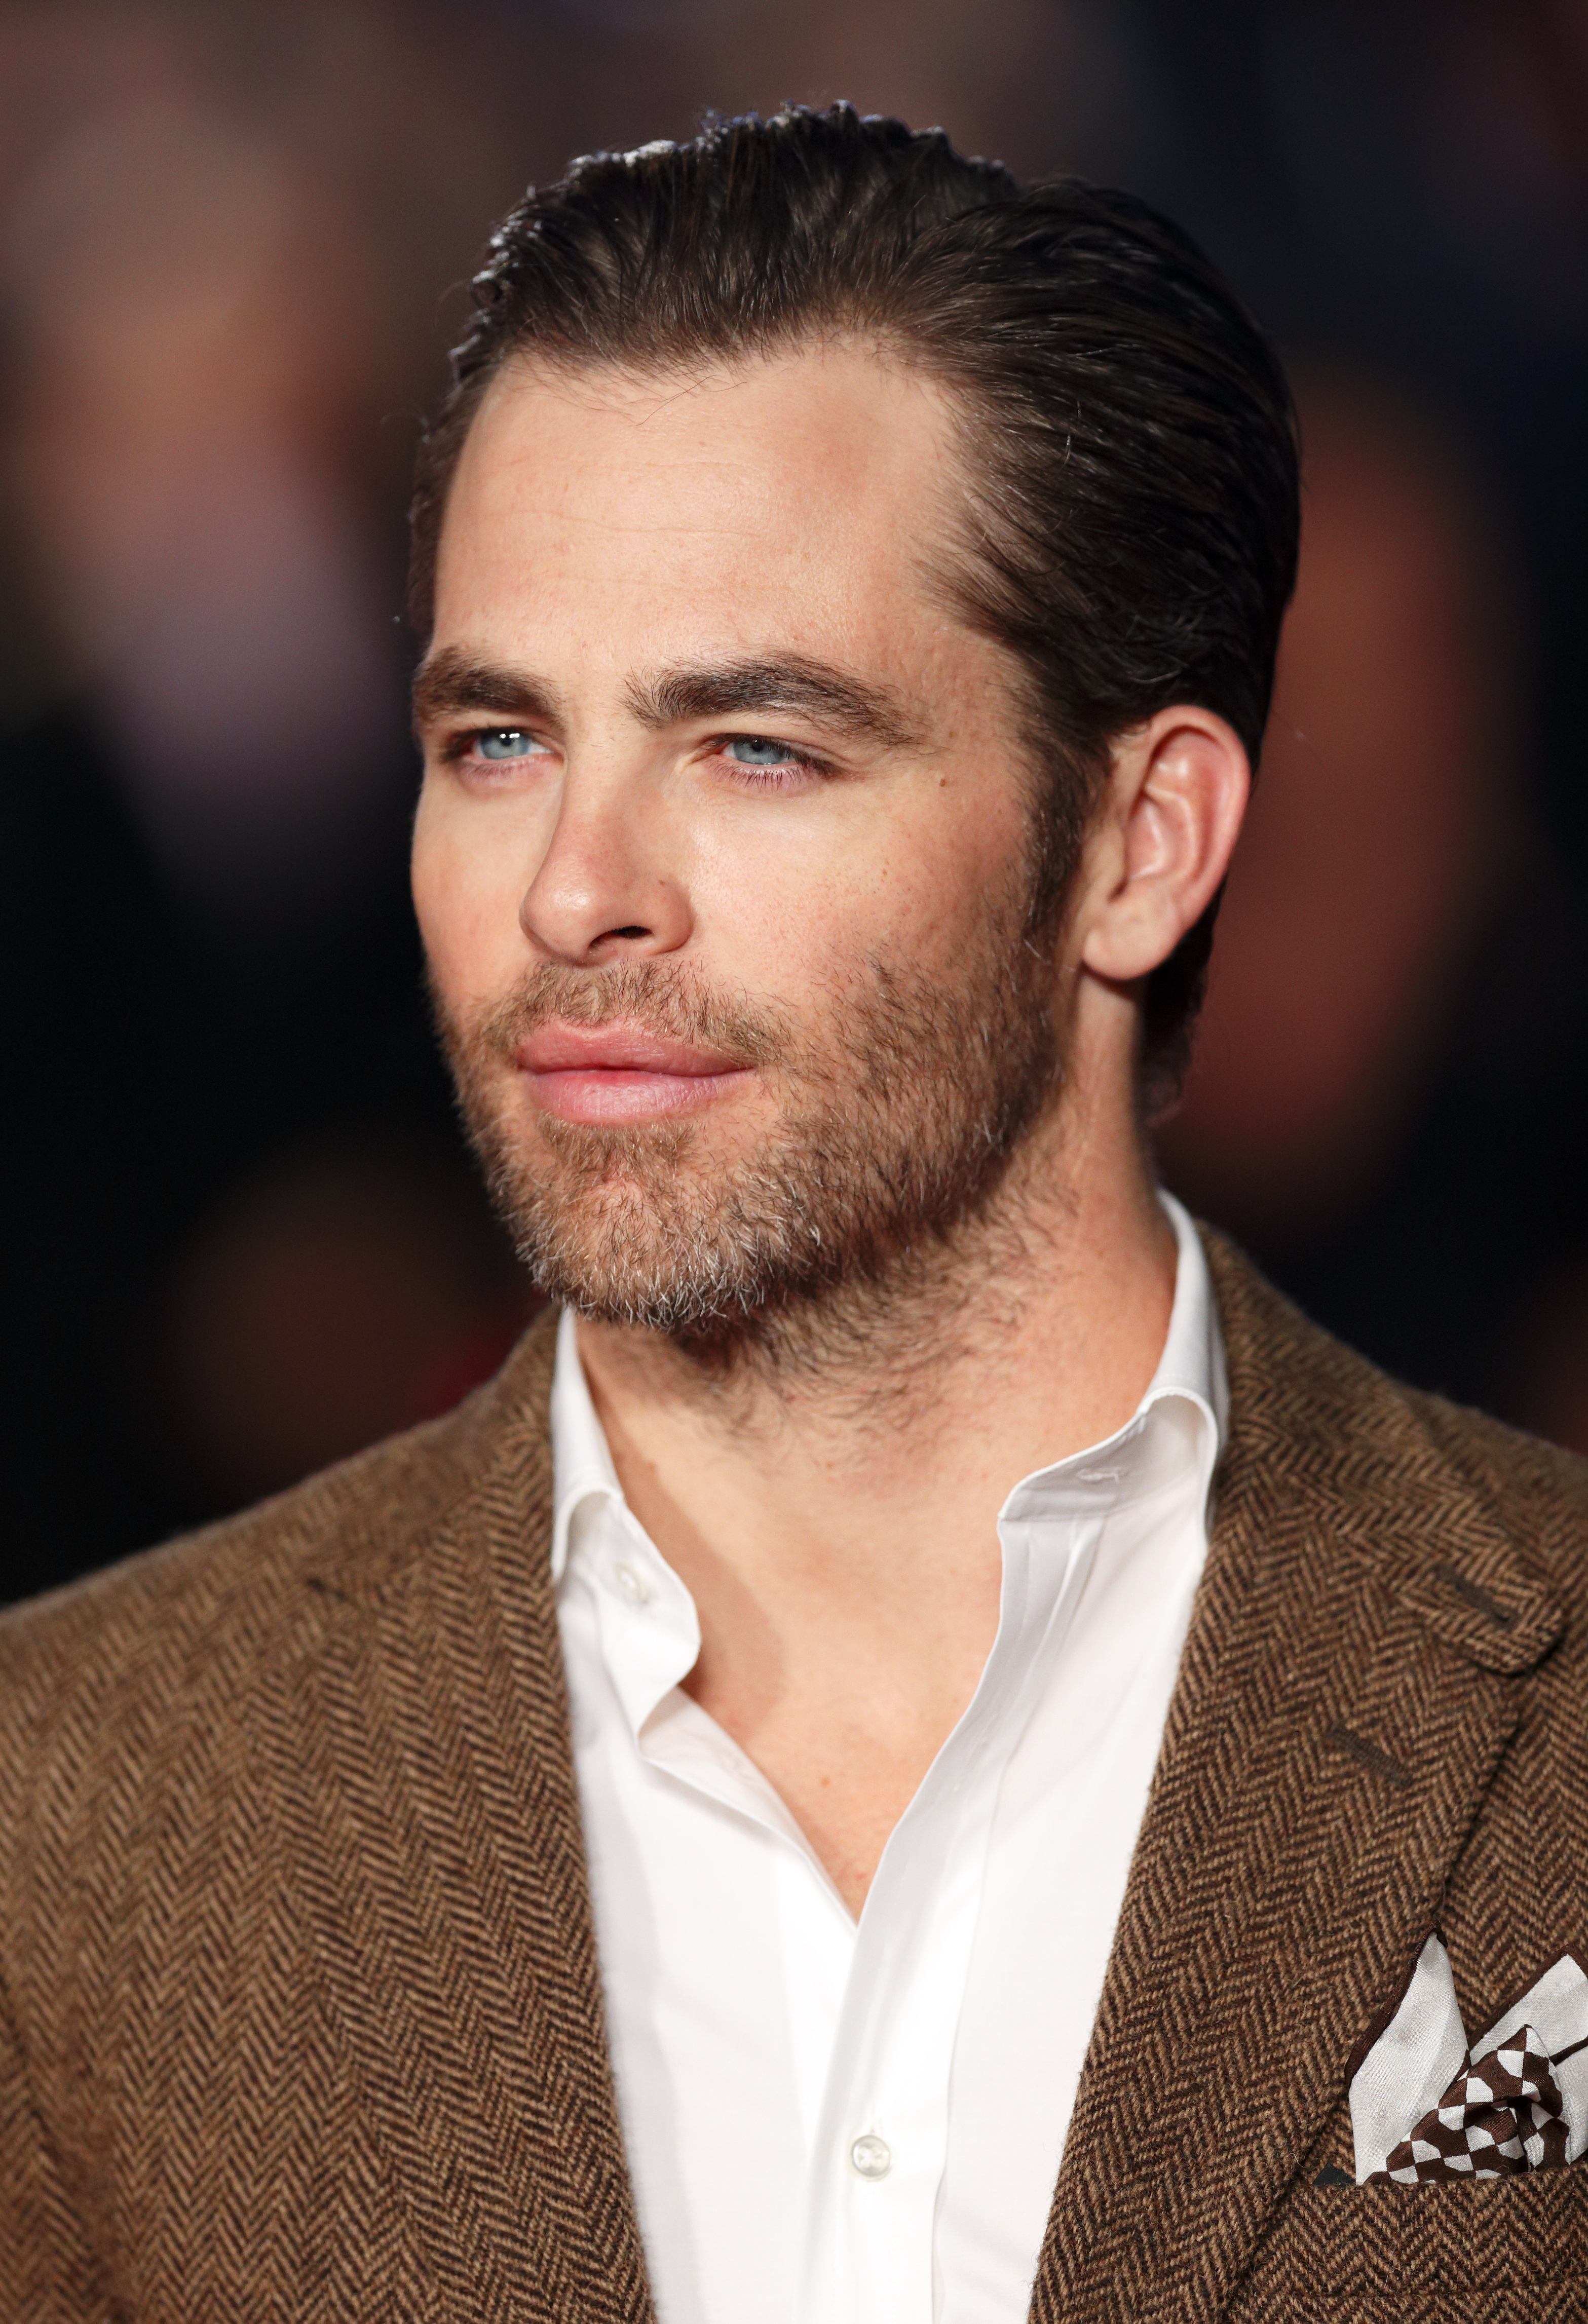 Chris Pine attends the UK Premiere of 'Jack Ryan: Shadow Recruit' at Vue Leicester Square on Jan. 20, 2014 in London. (Max Mumby—Indigo/Getty Images)